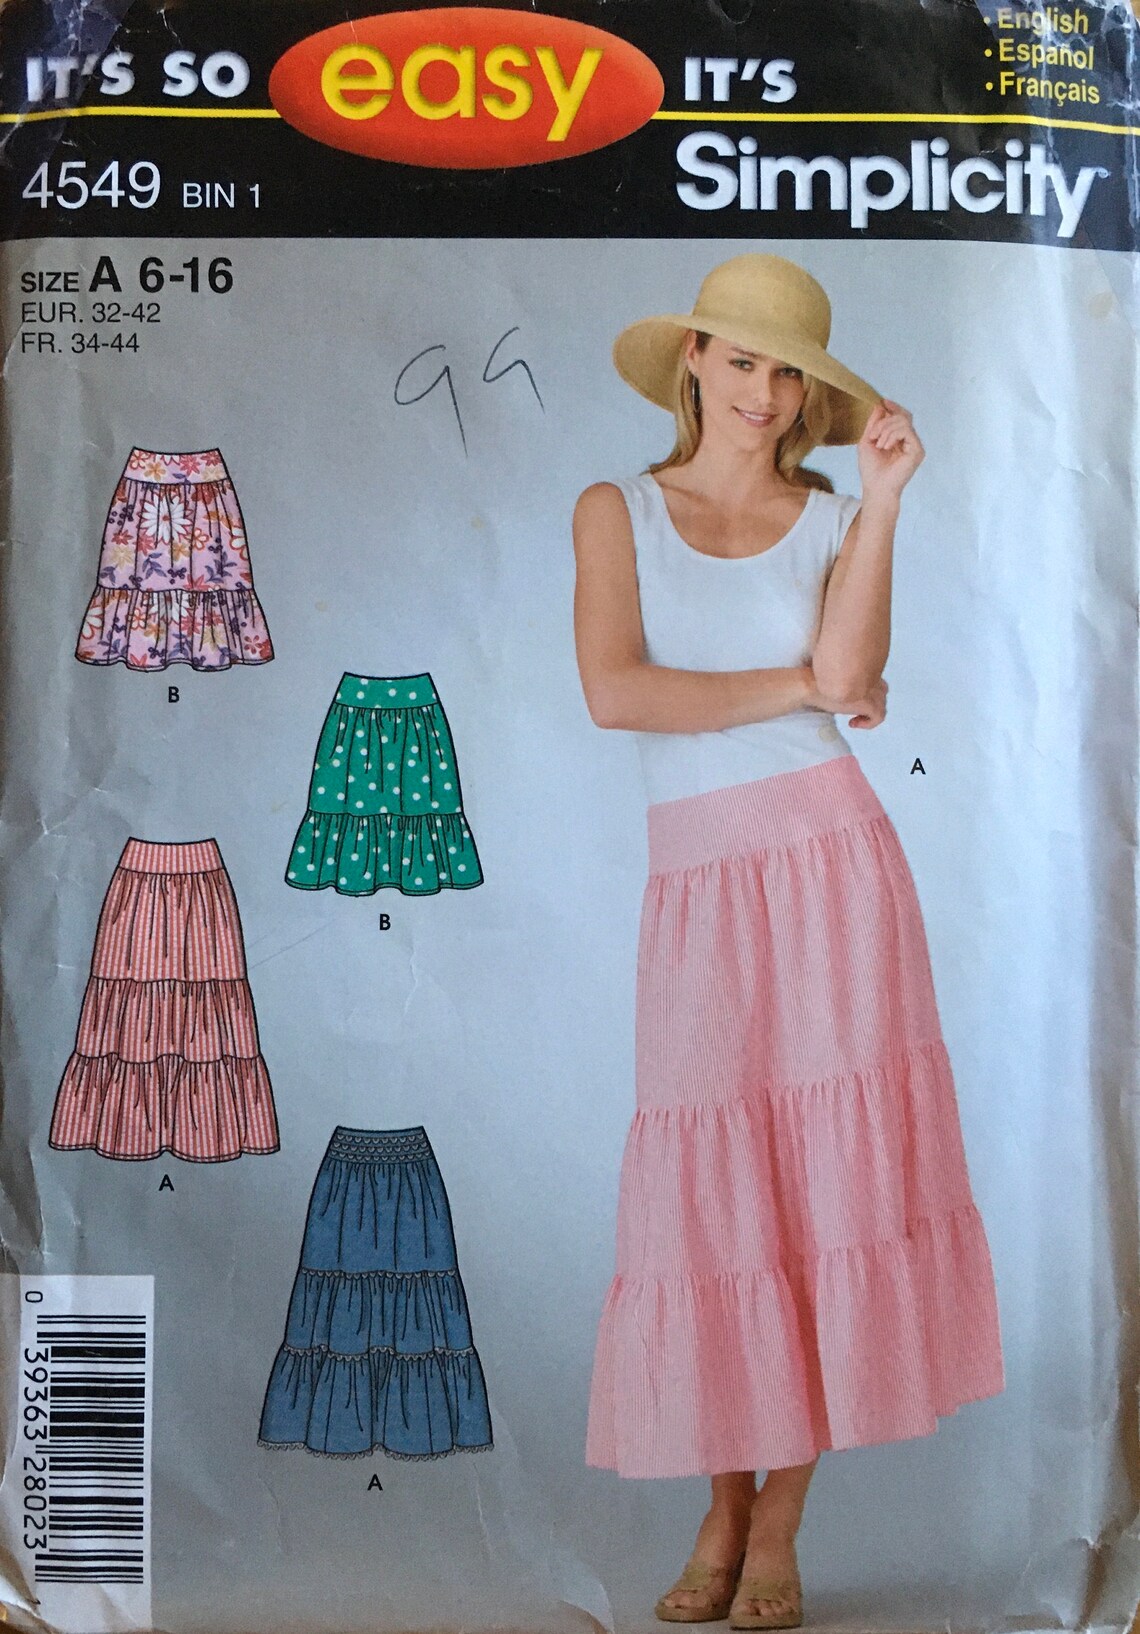 Simplicity 4549 Sewing Pattern UNCUT - Etsy